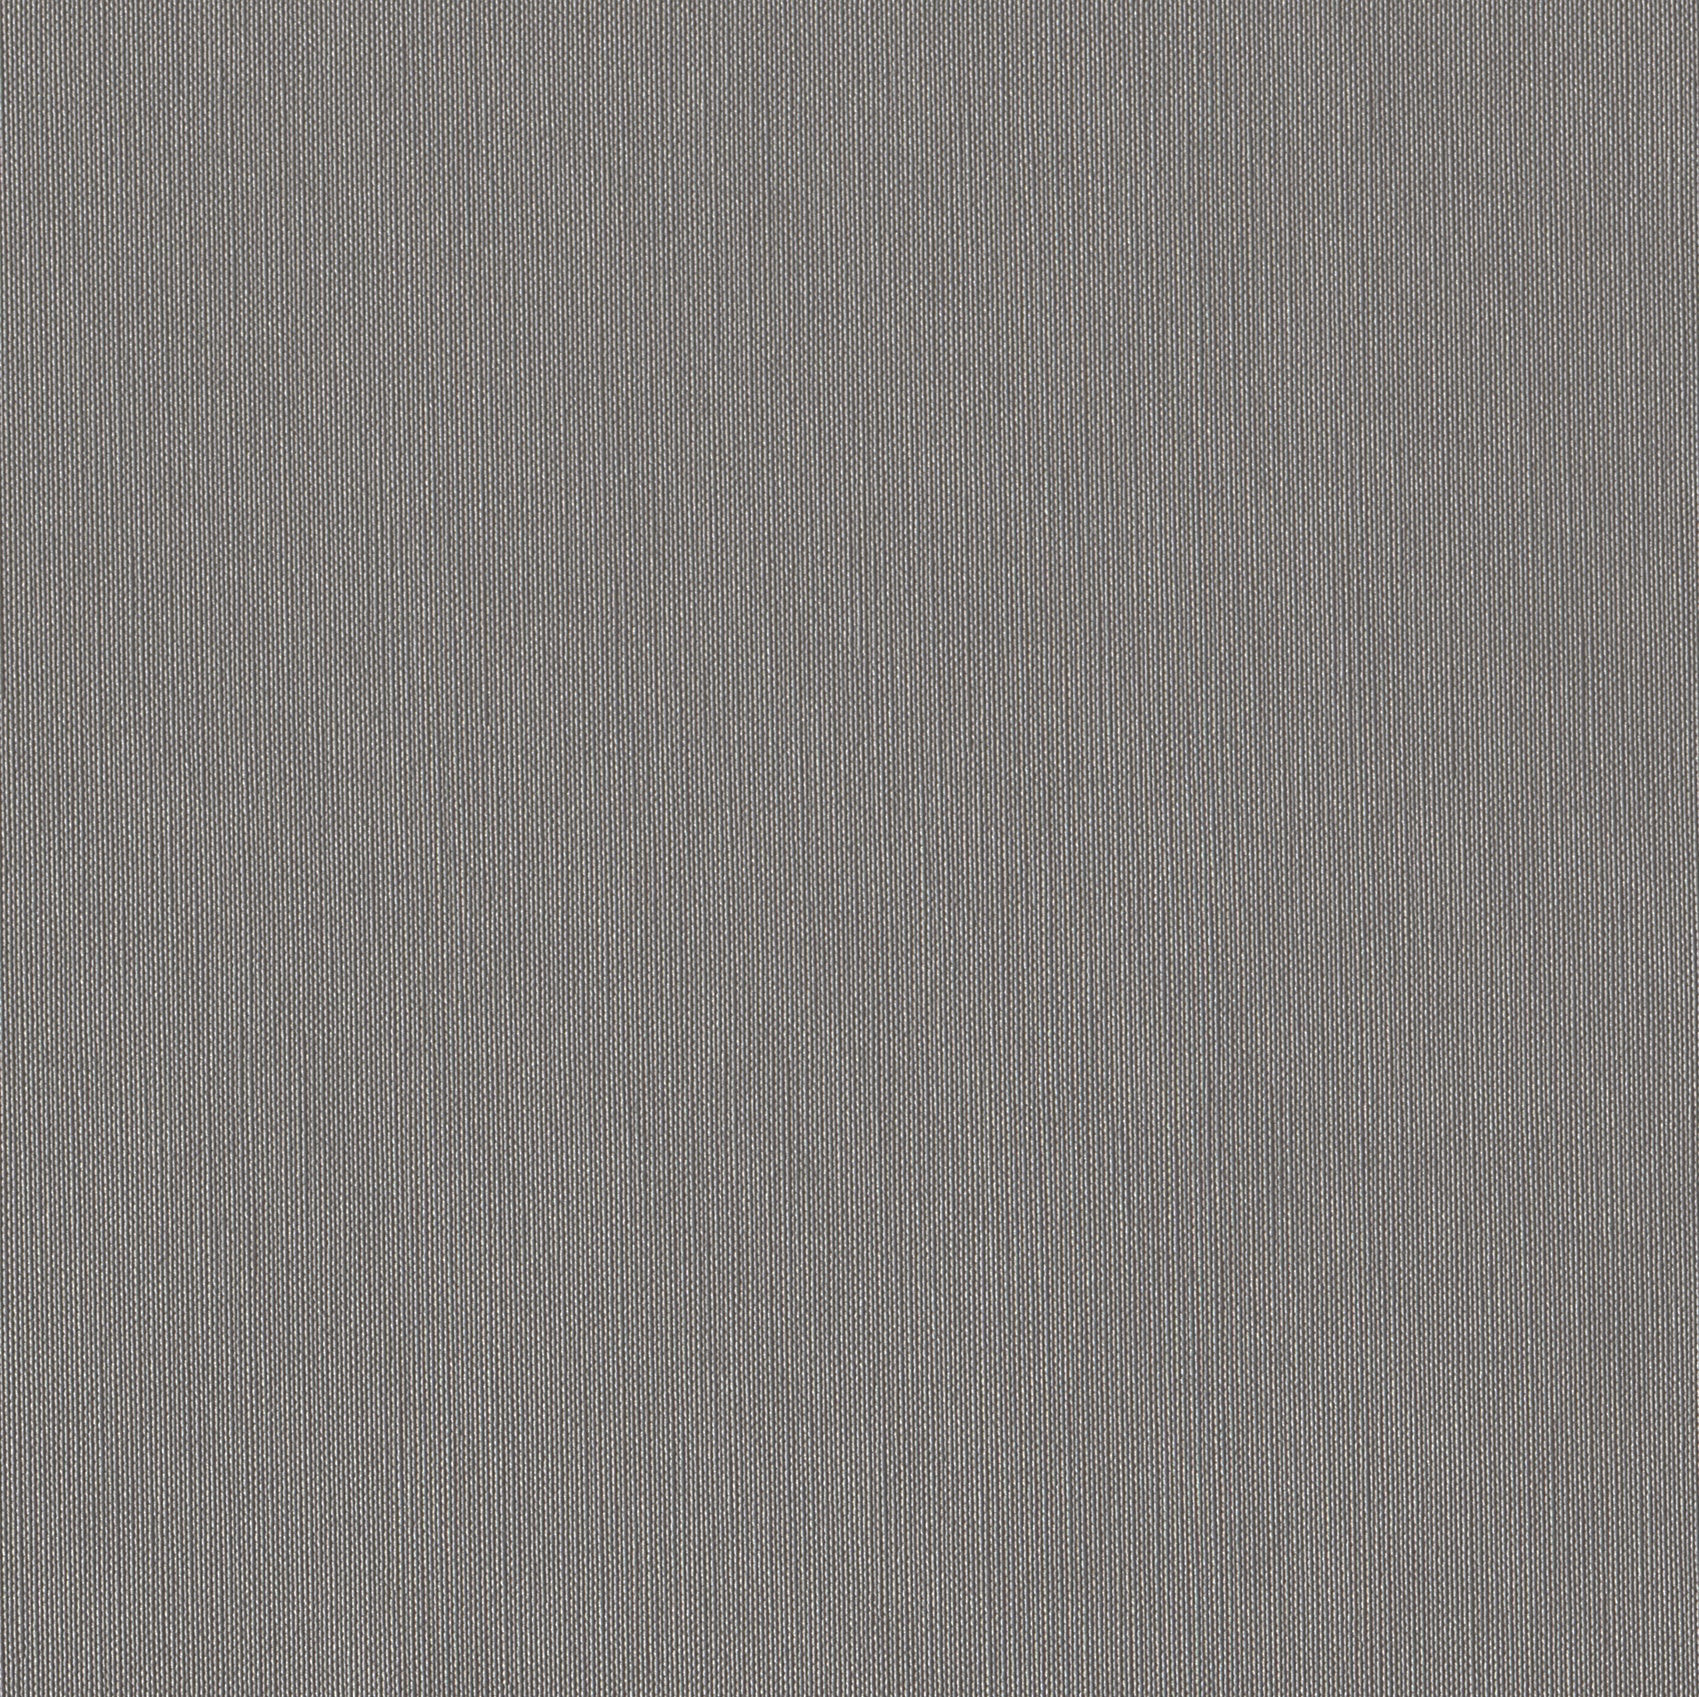       Andriali-Contract-Vinyl_Upholstery-Design-LegendFR-FR5-Color-605R.Silver-Width-140cm